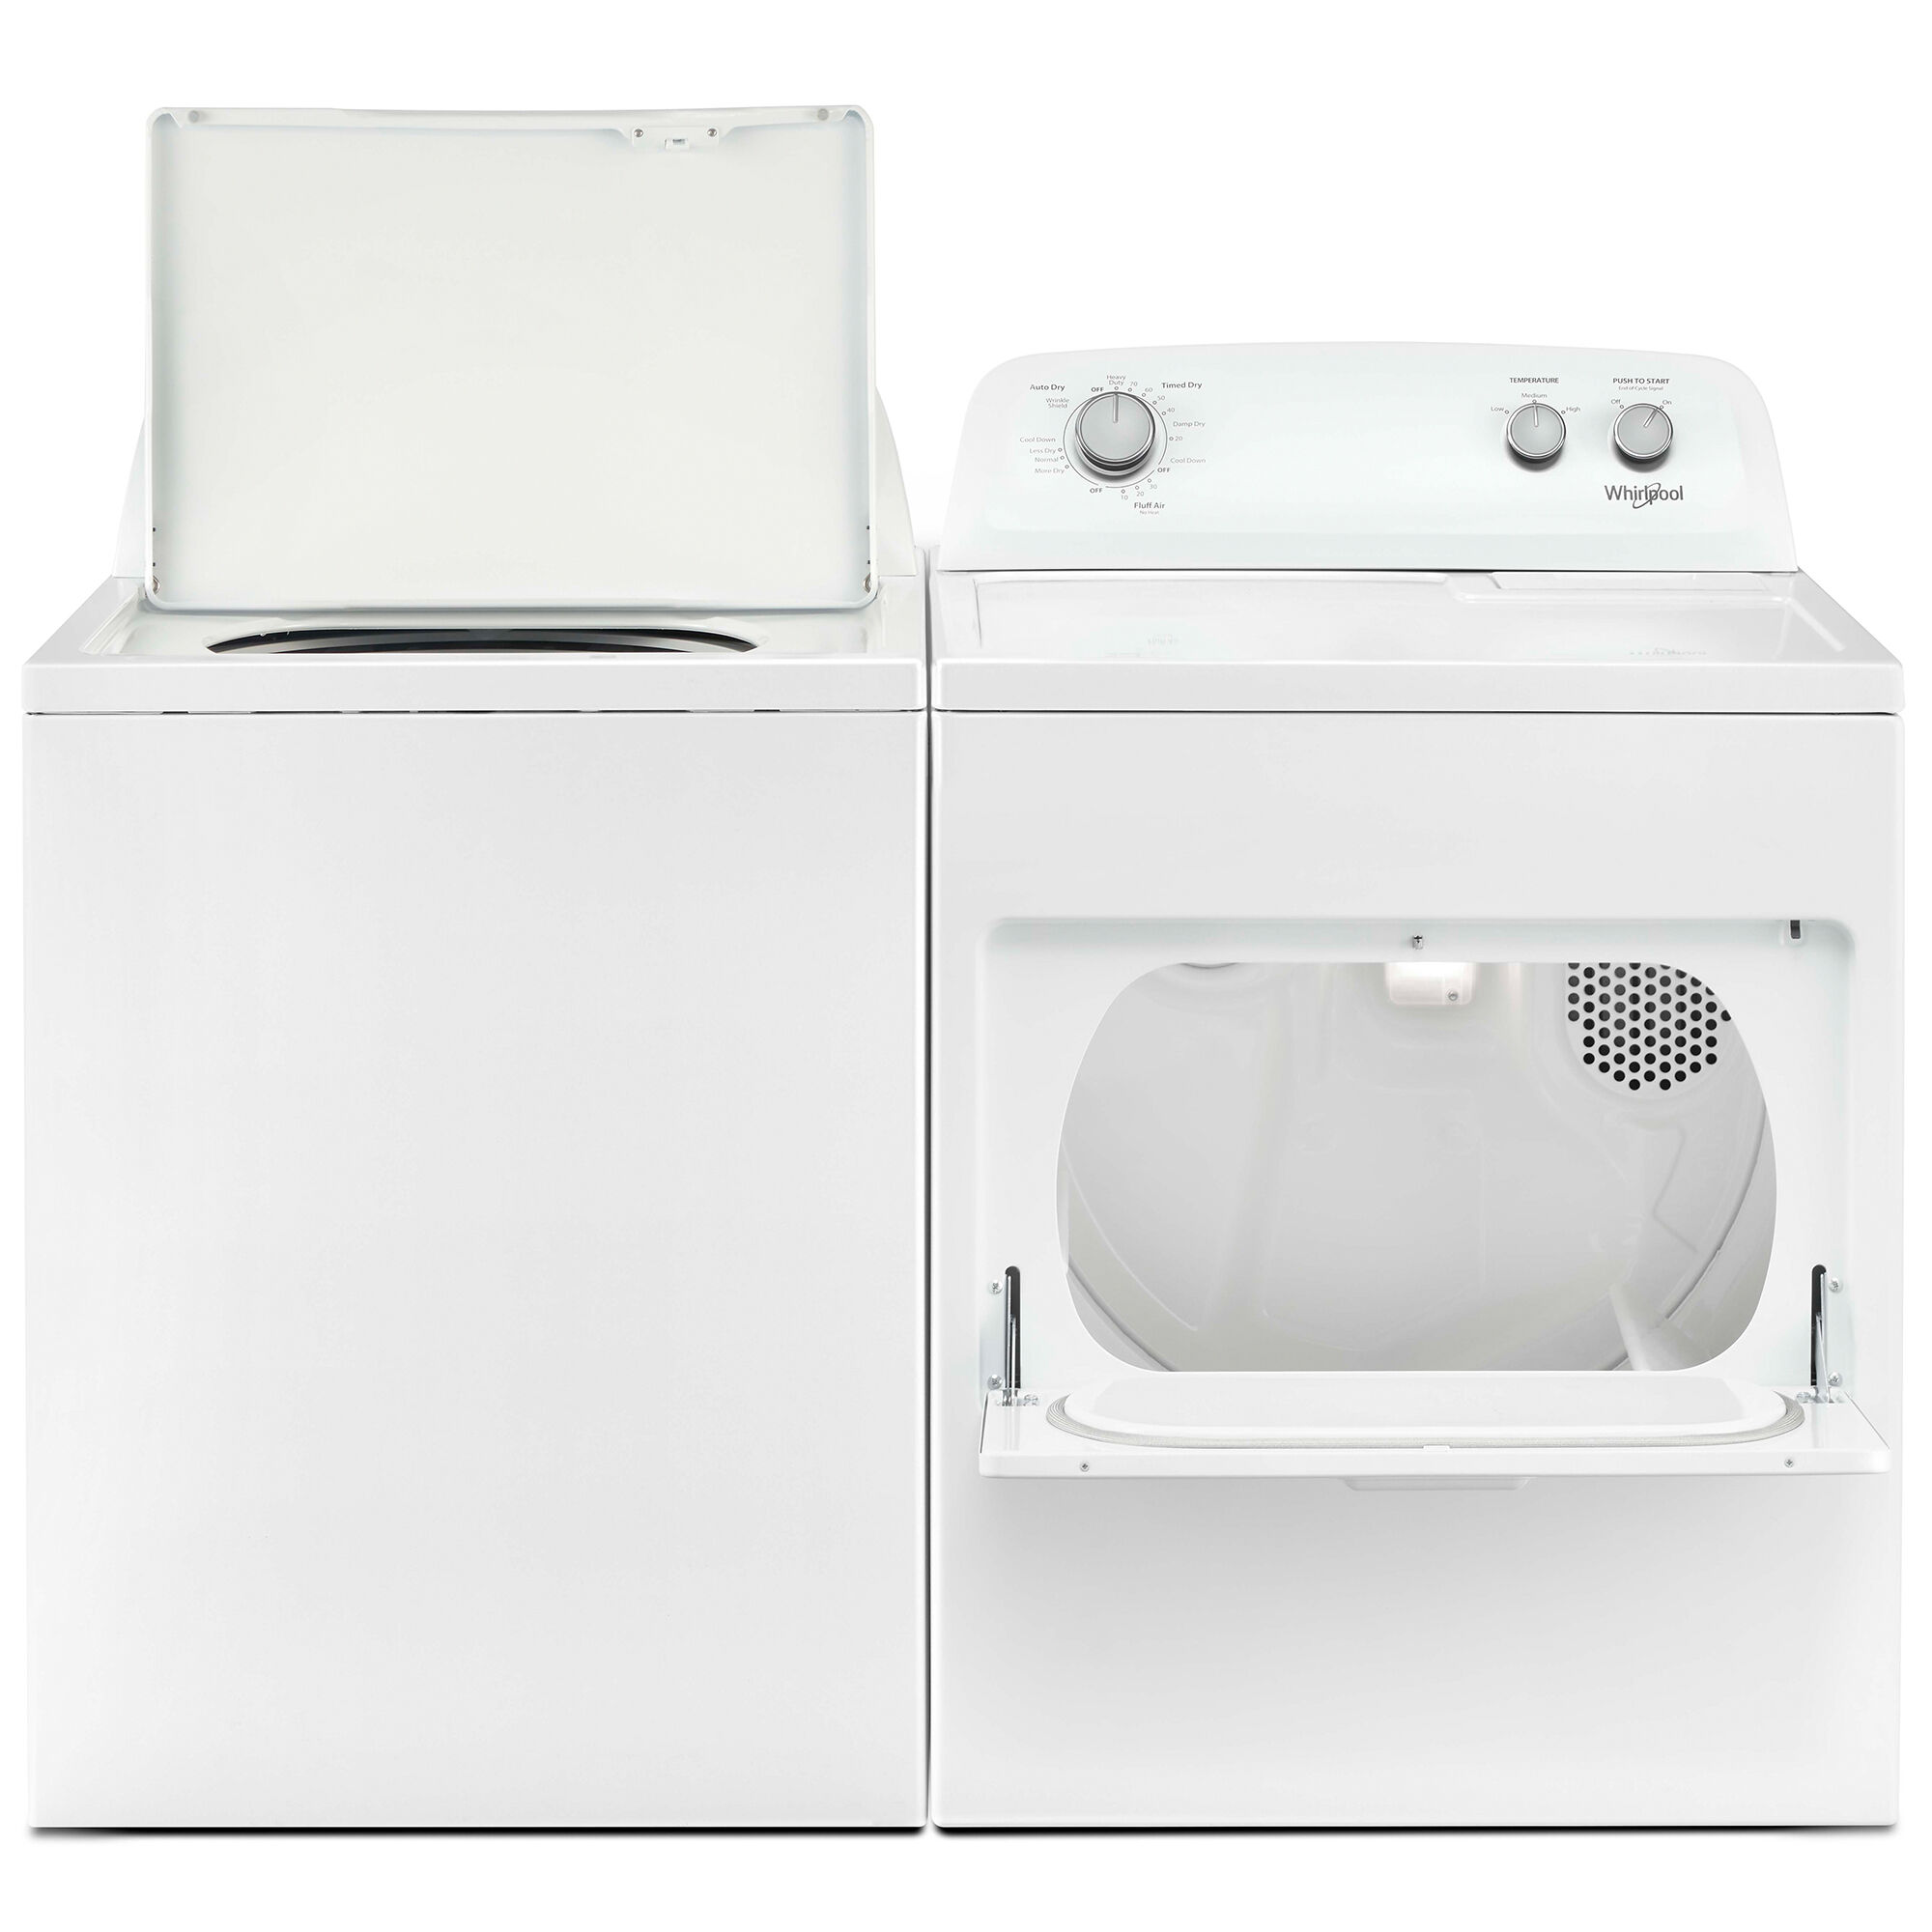 Whirlpool 27.5 in. 3.8 cu. ft. Top Load Washer - White